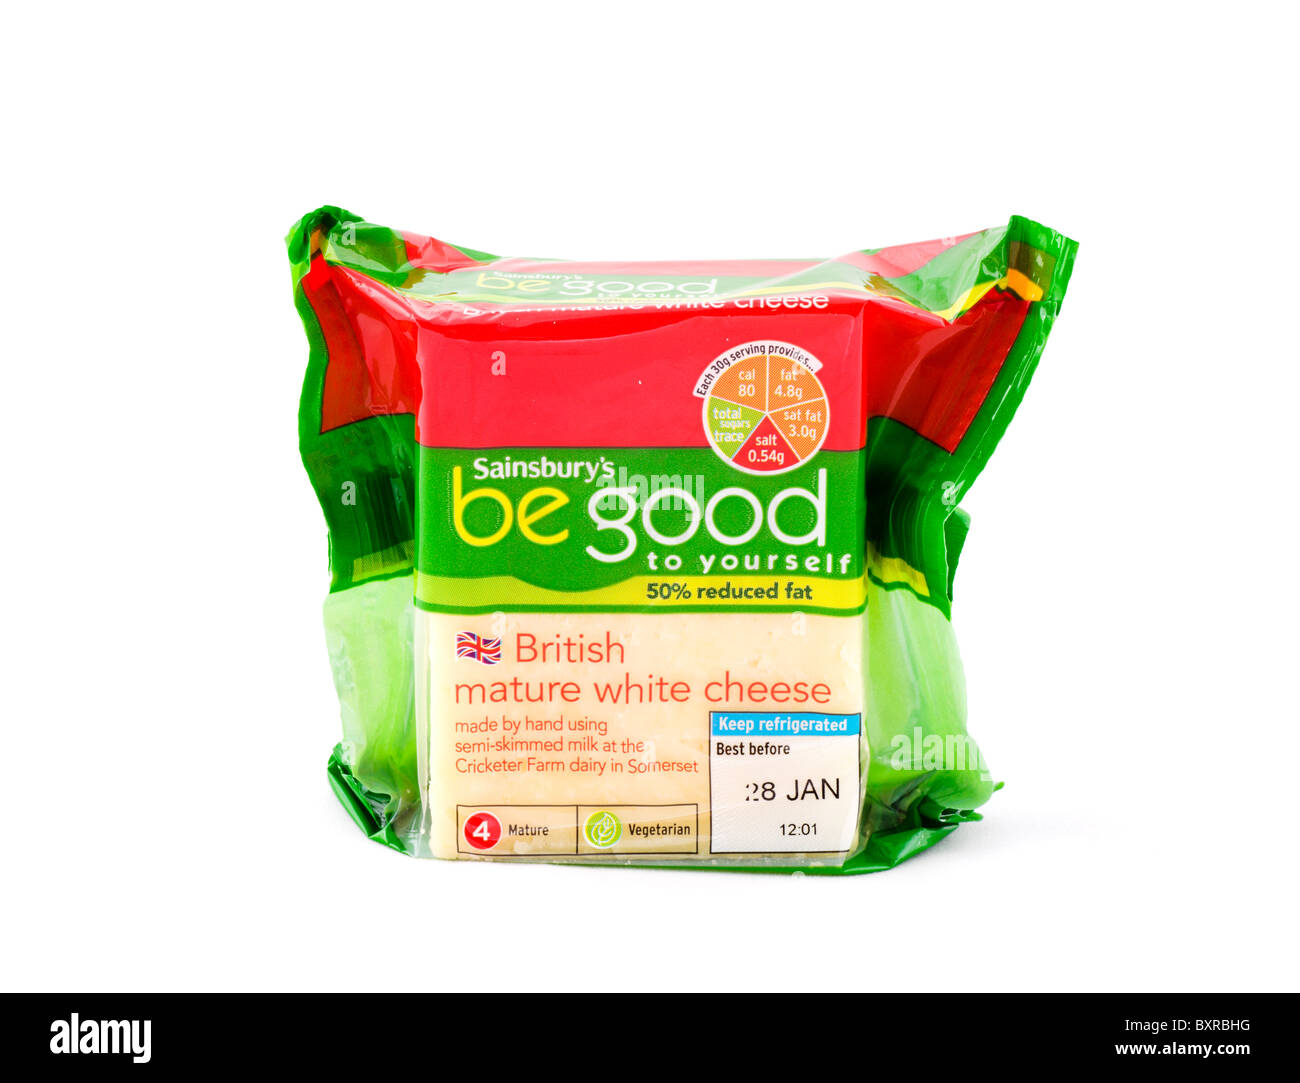 Pack of Sainsbury's 'Be Good to Yourself' reduced fat mature white cheese, UK Stock Photo